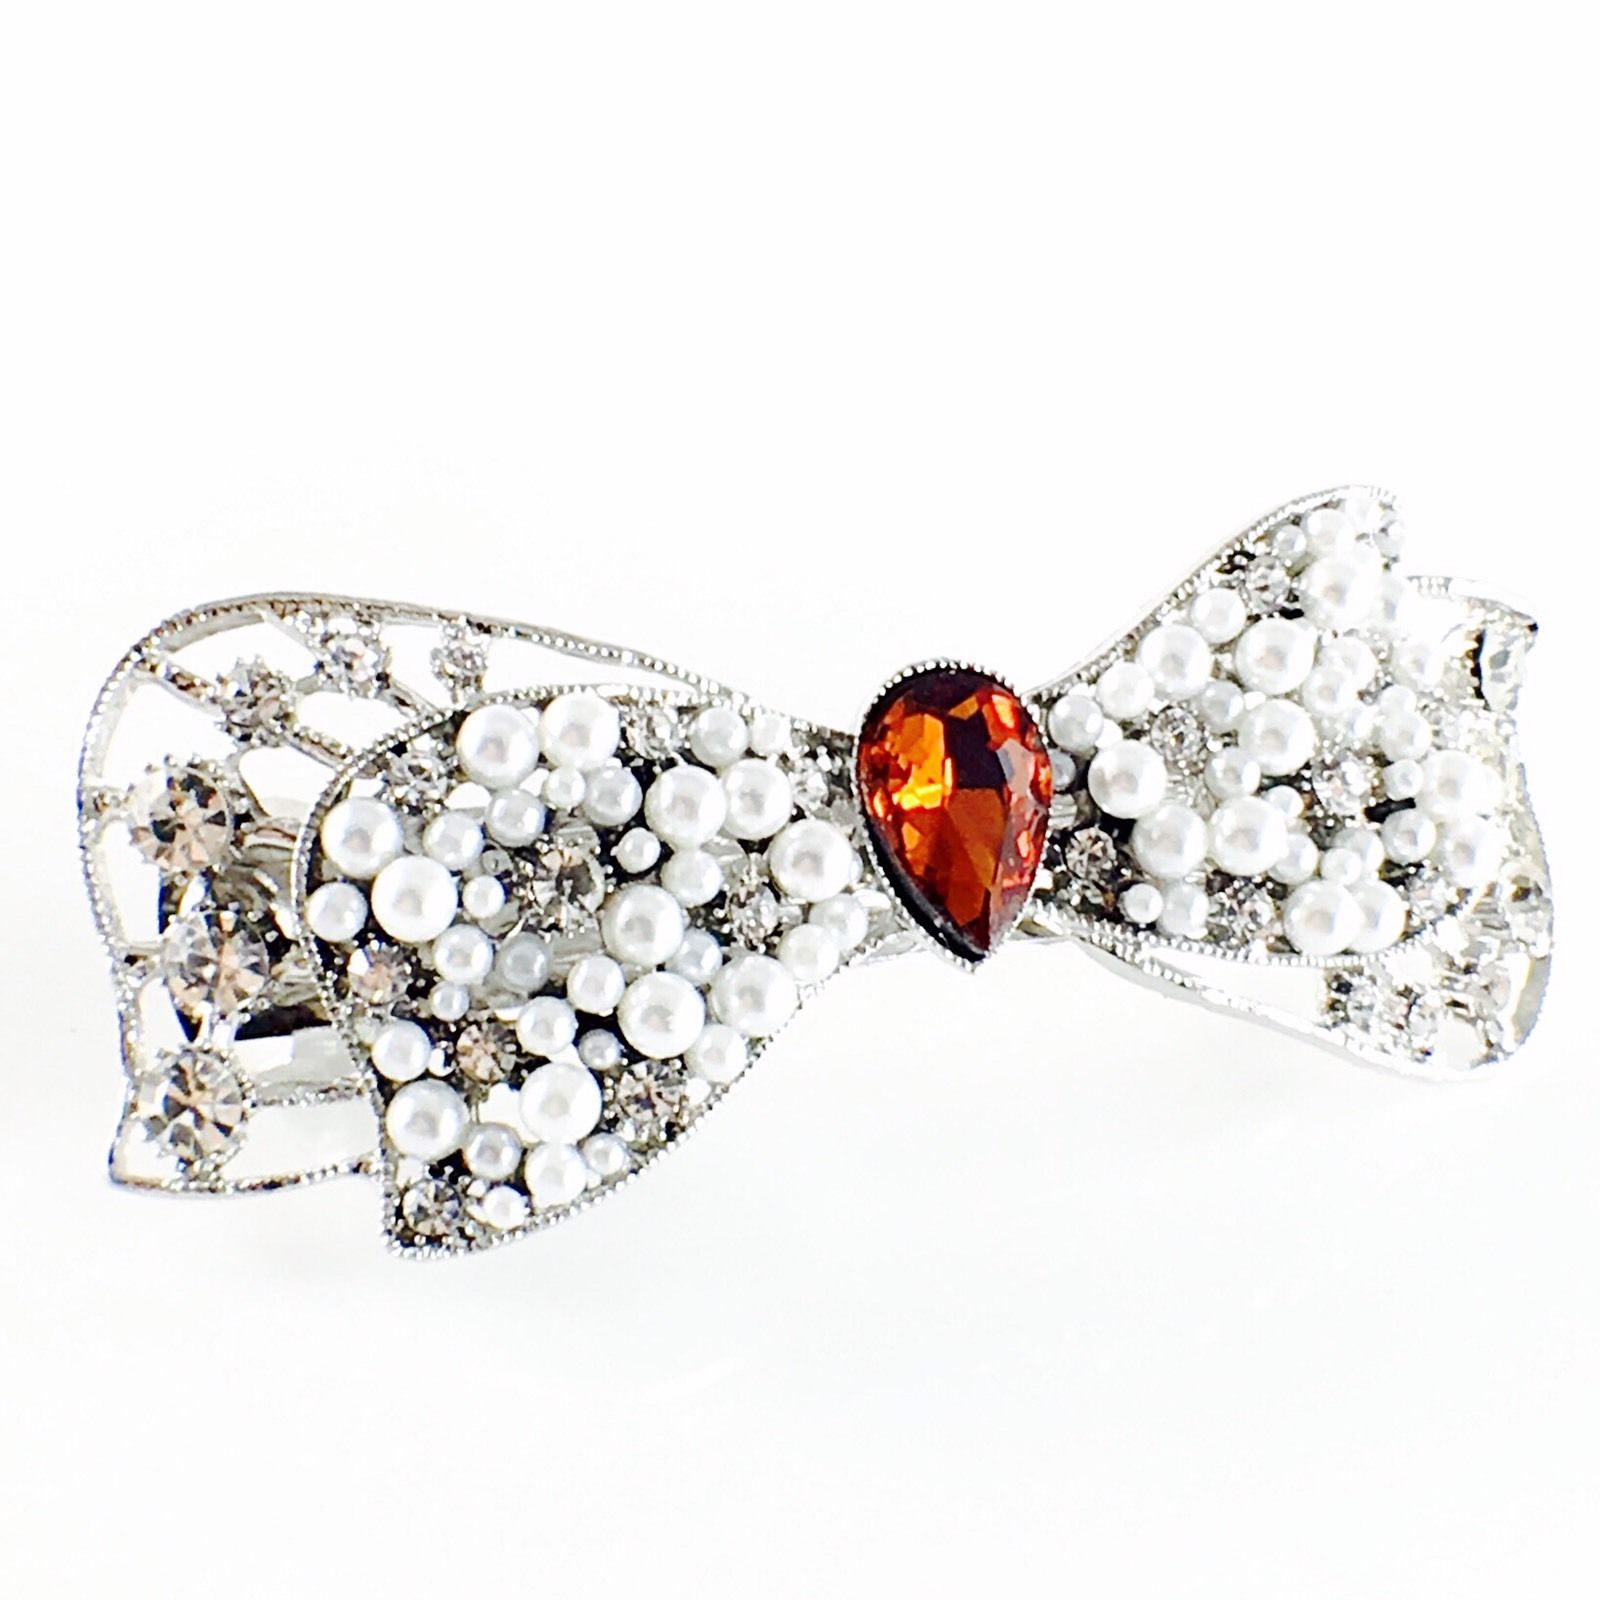 Bow Knot Barrette Rhinestone Crystal silver base white pearls Clear Brown, Barrette - MOGHANT